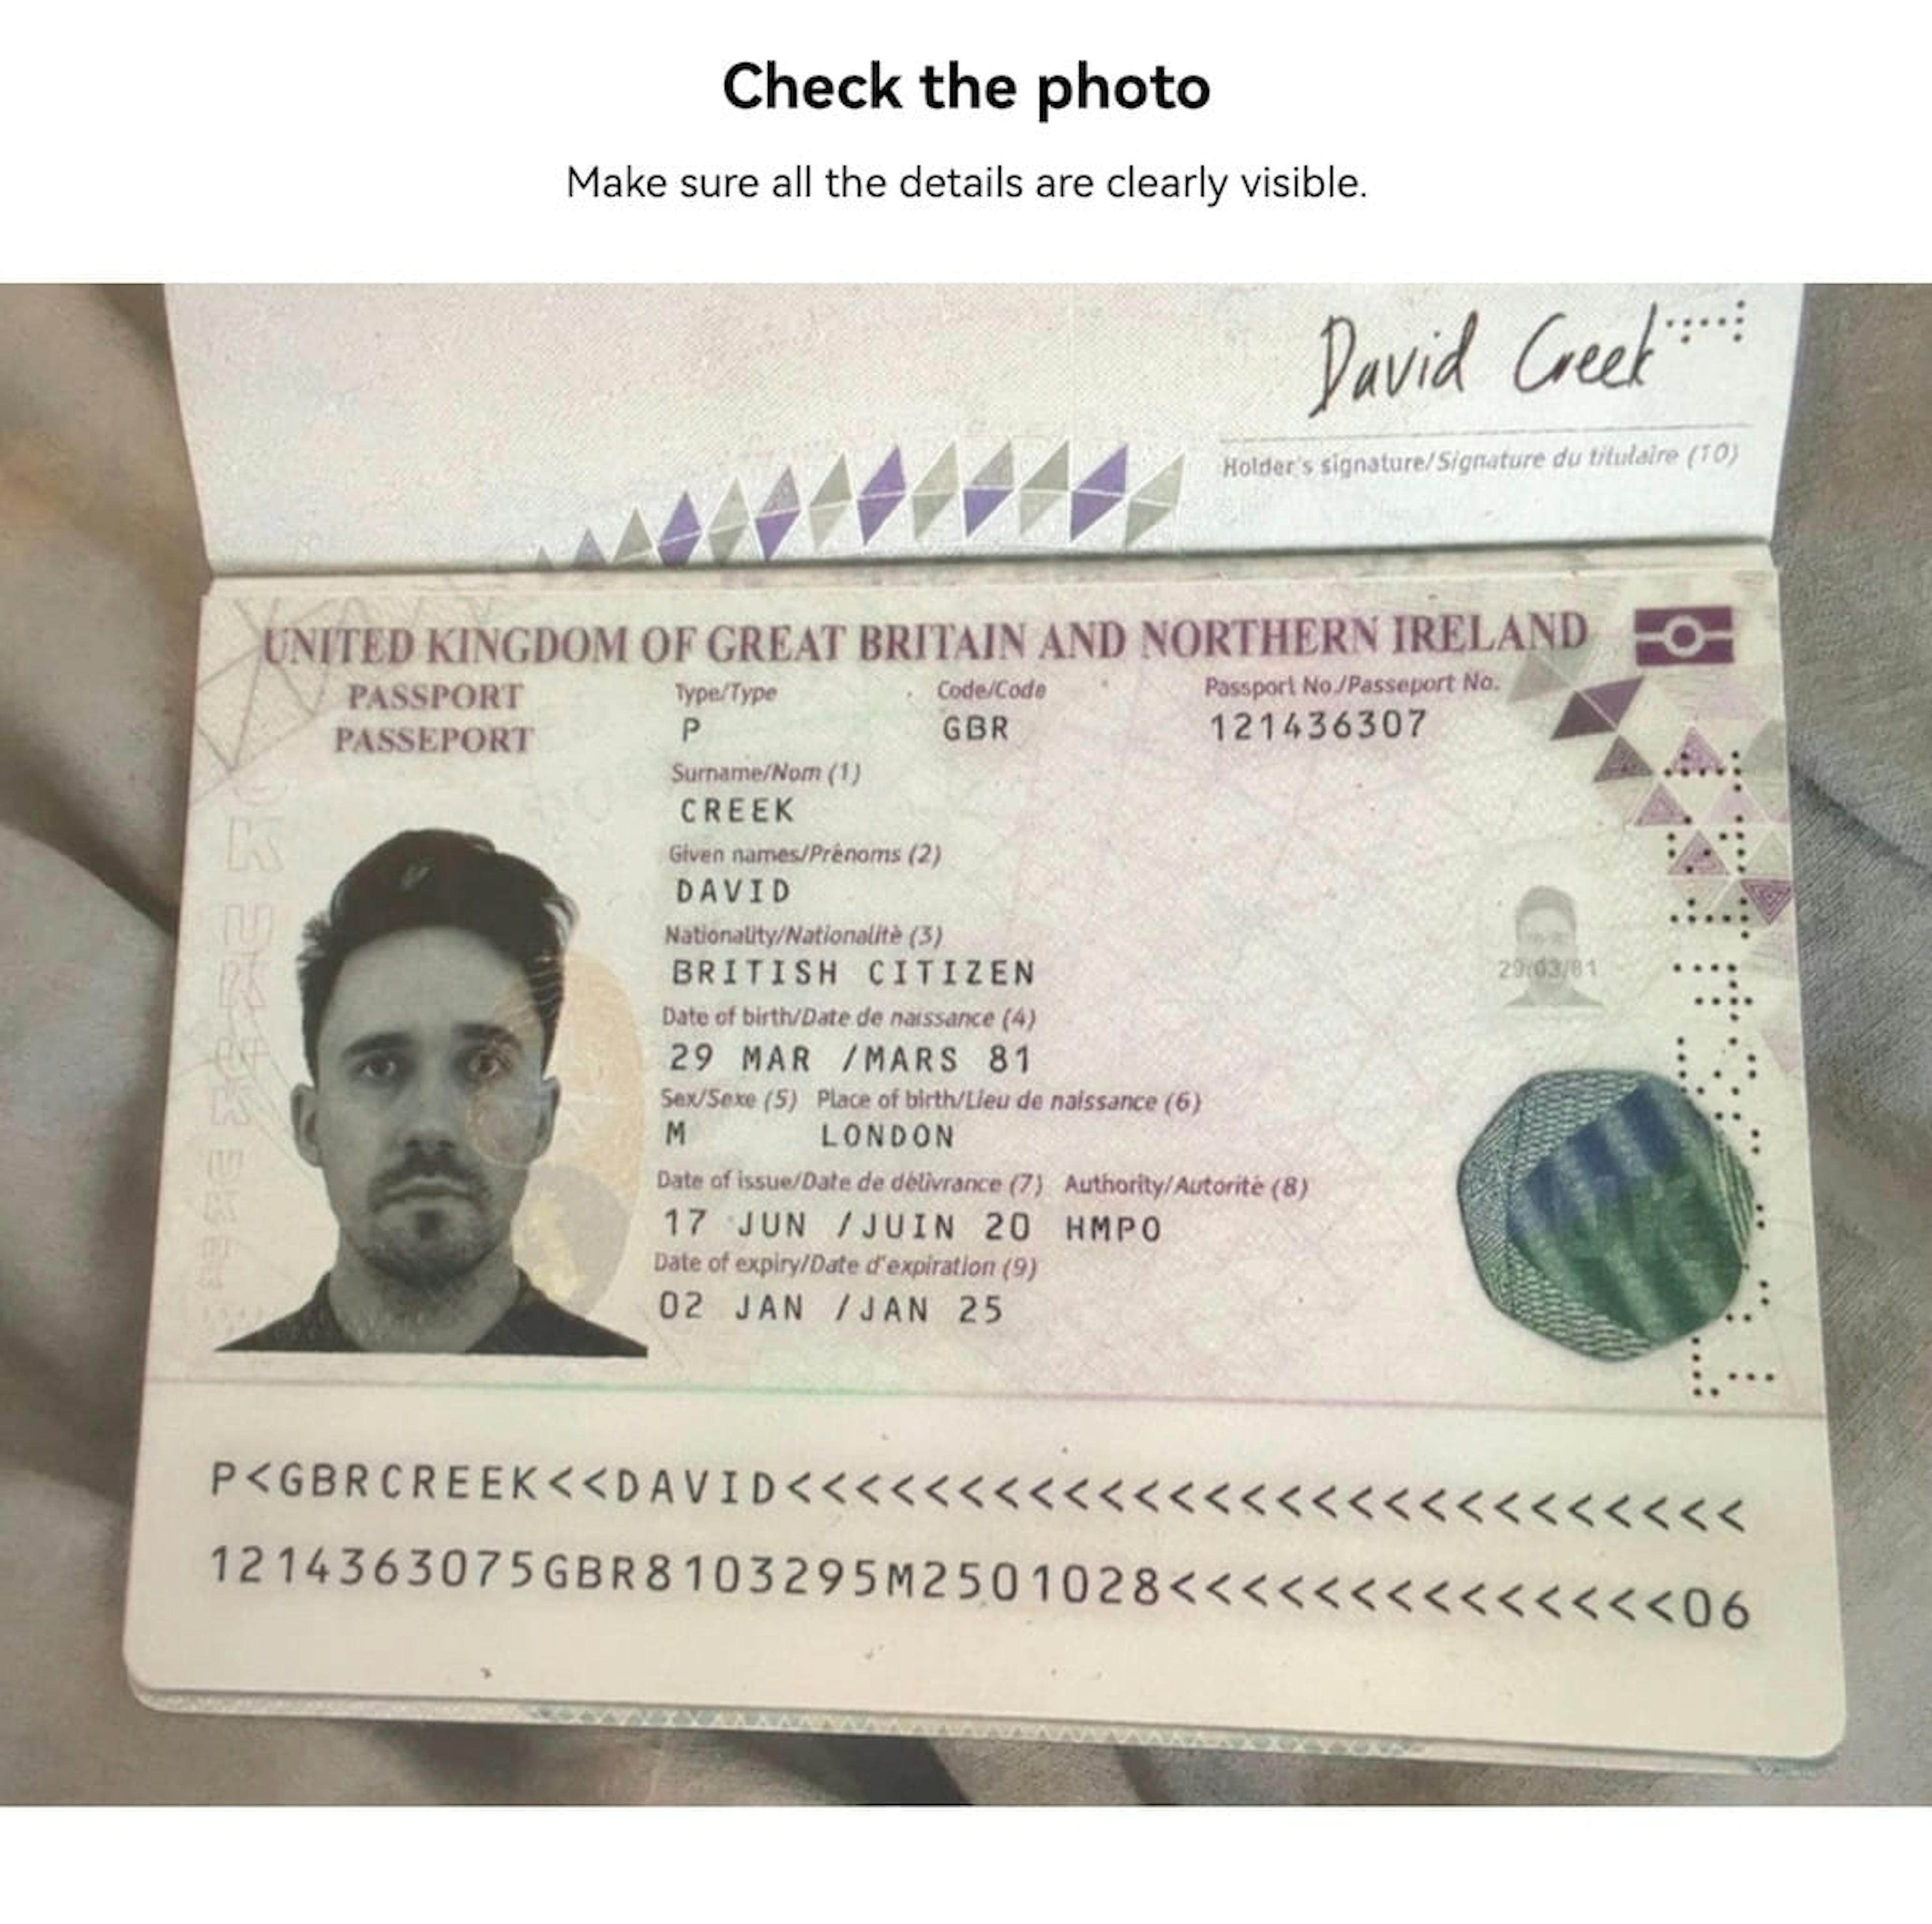 An image of the faked British passport reportedly submitted to OKX’s identity verification system. Source: 404 Media